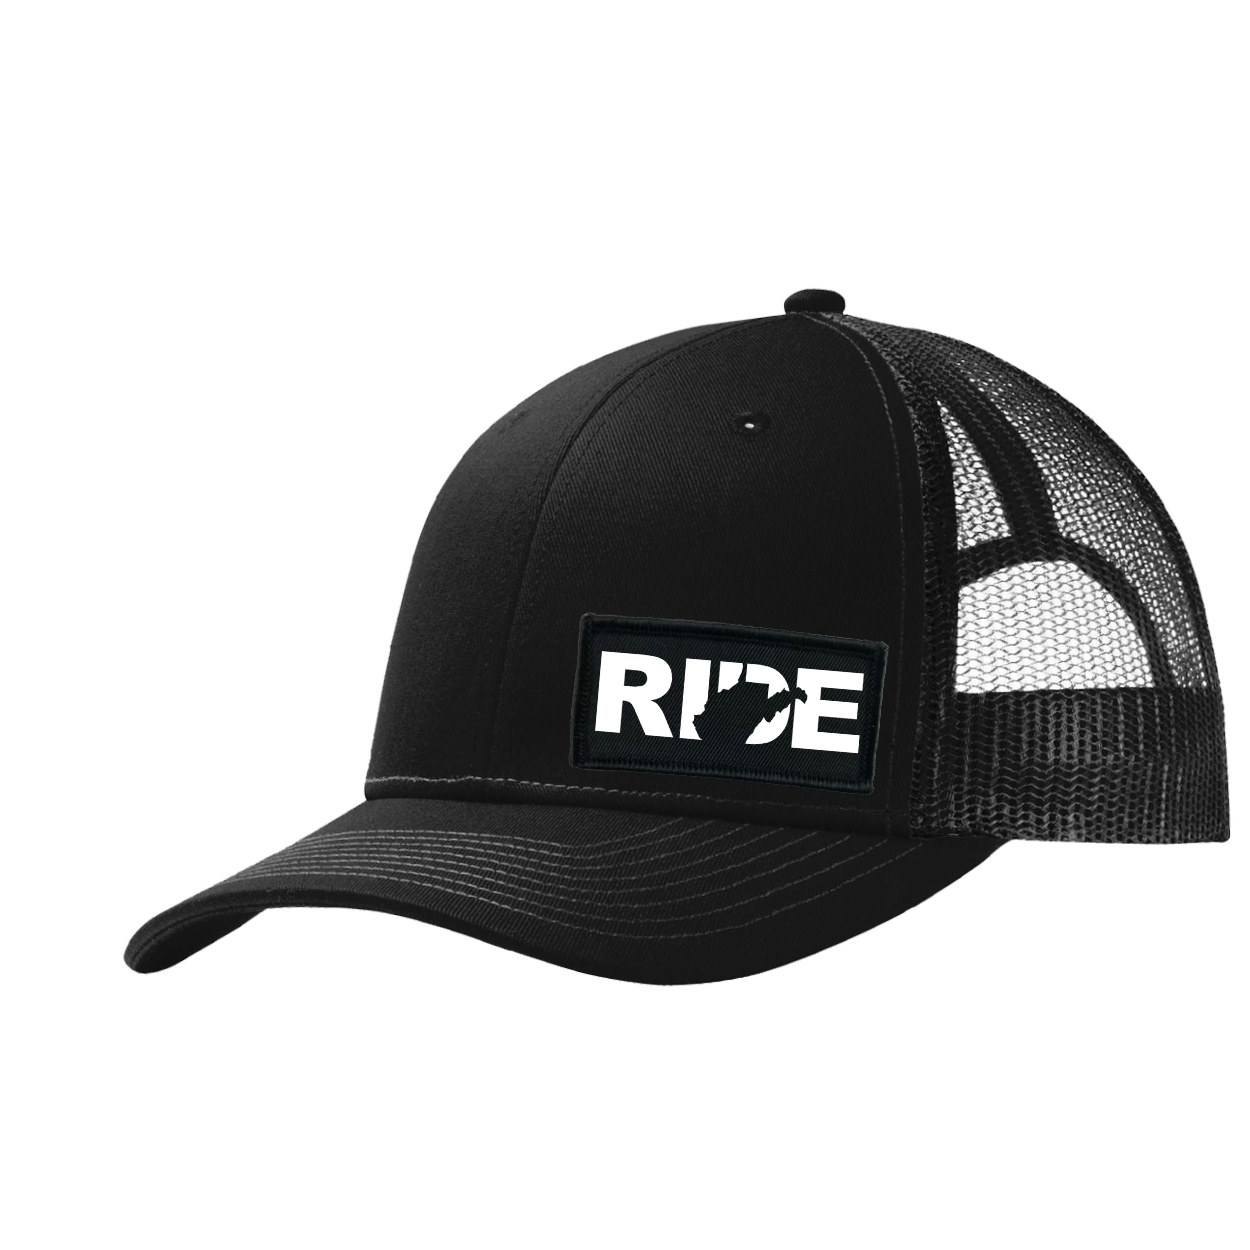 Ride West Virginia Night Out Woven Patch Snapback Trucker Hat Black (White Logo)